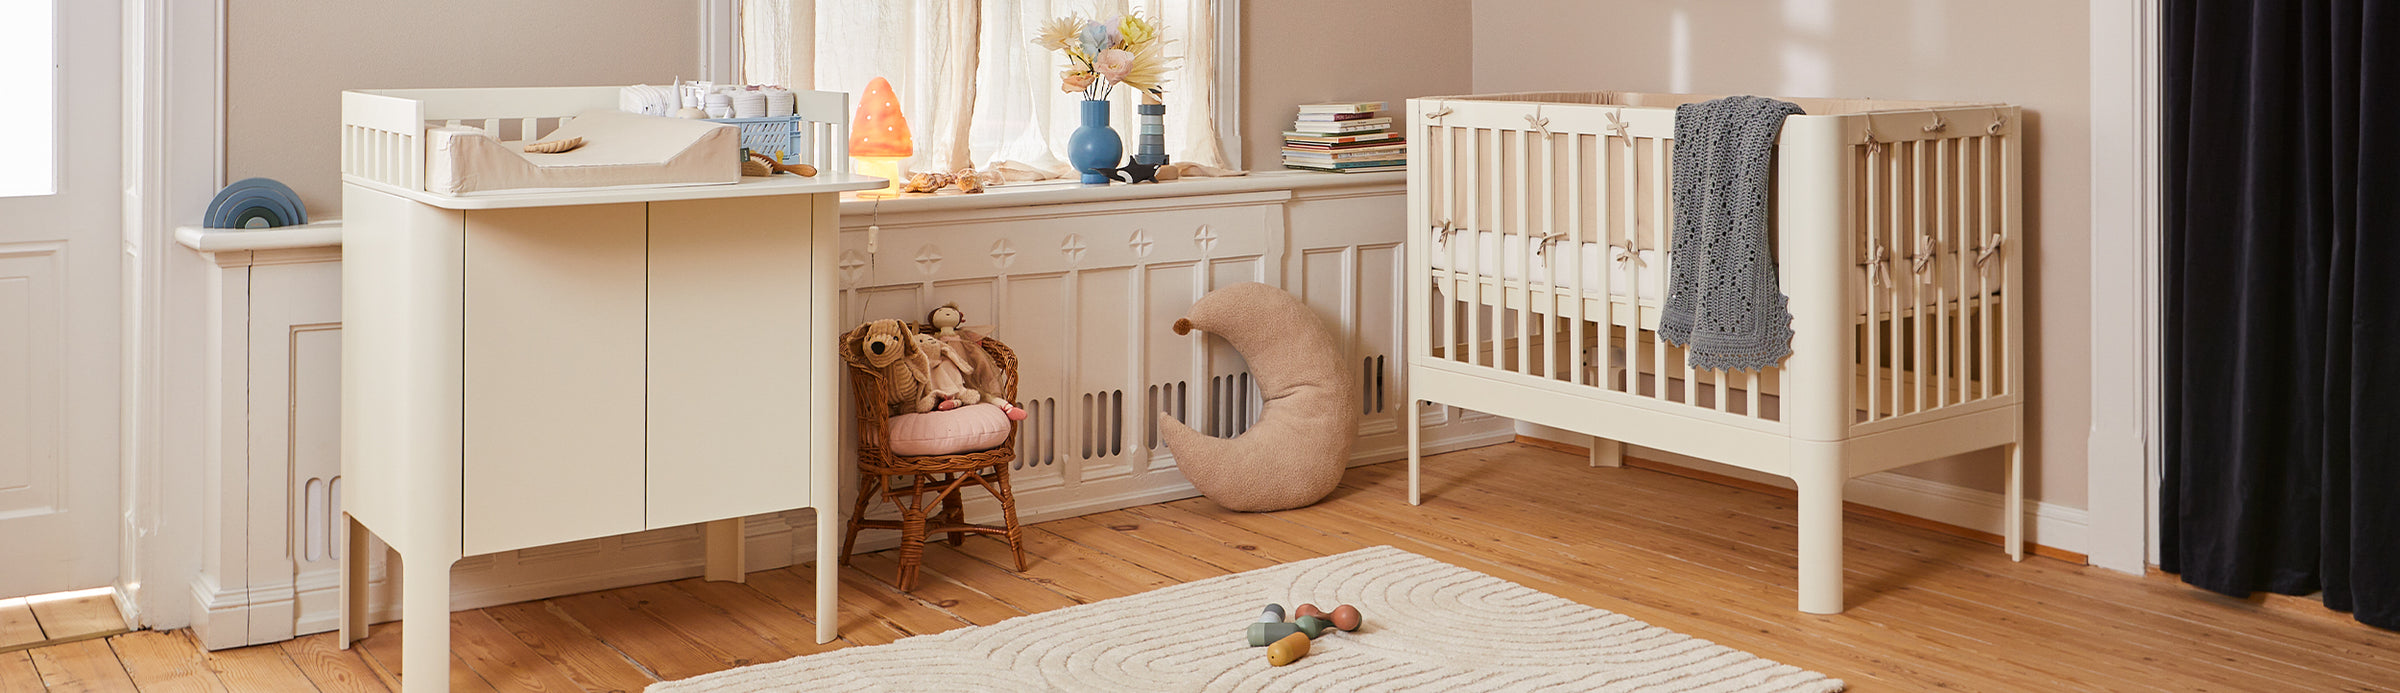 Baby room with a cot bed and changing table from FLEXA